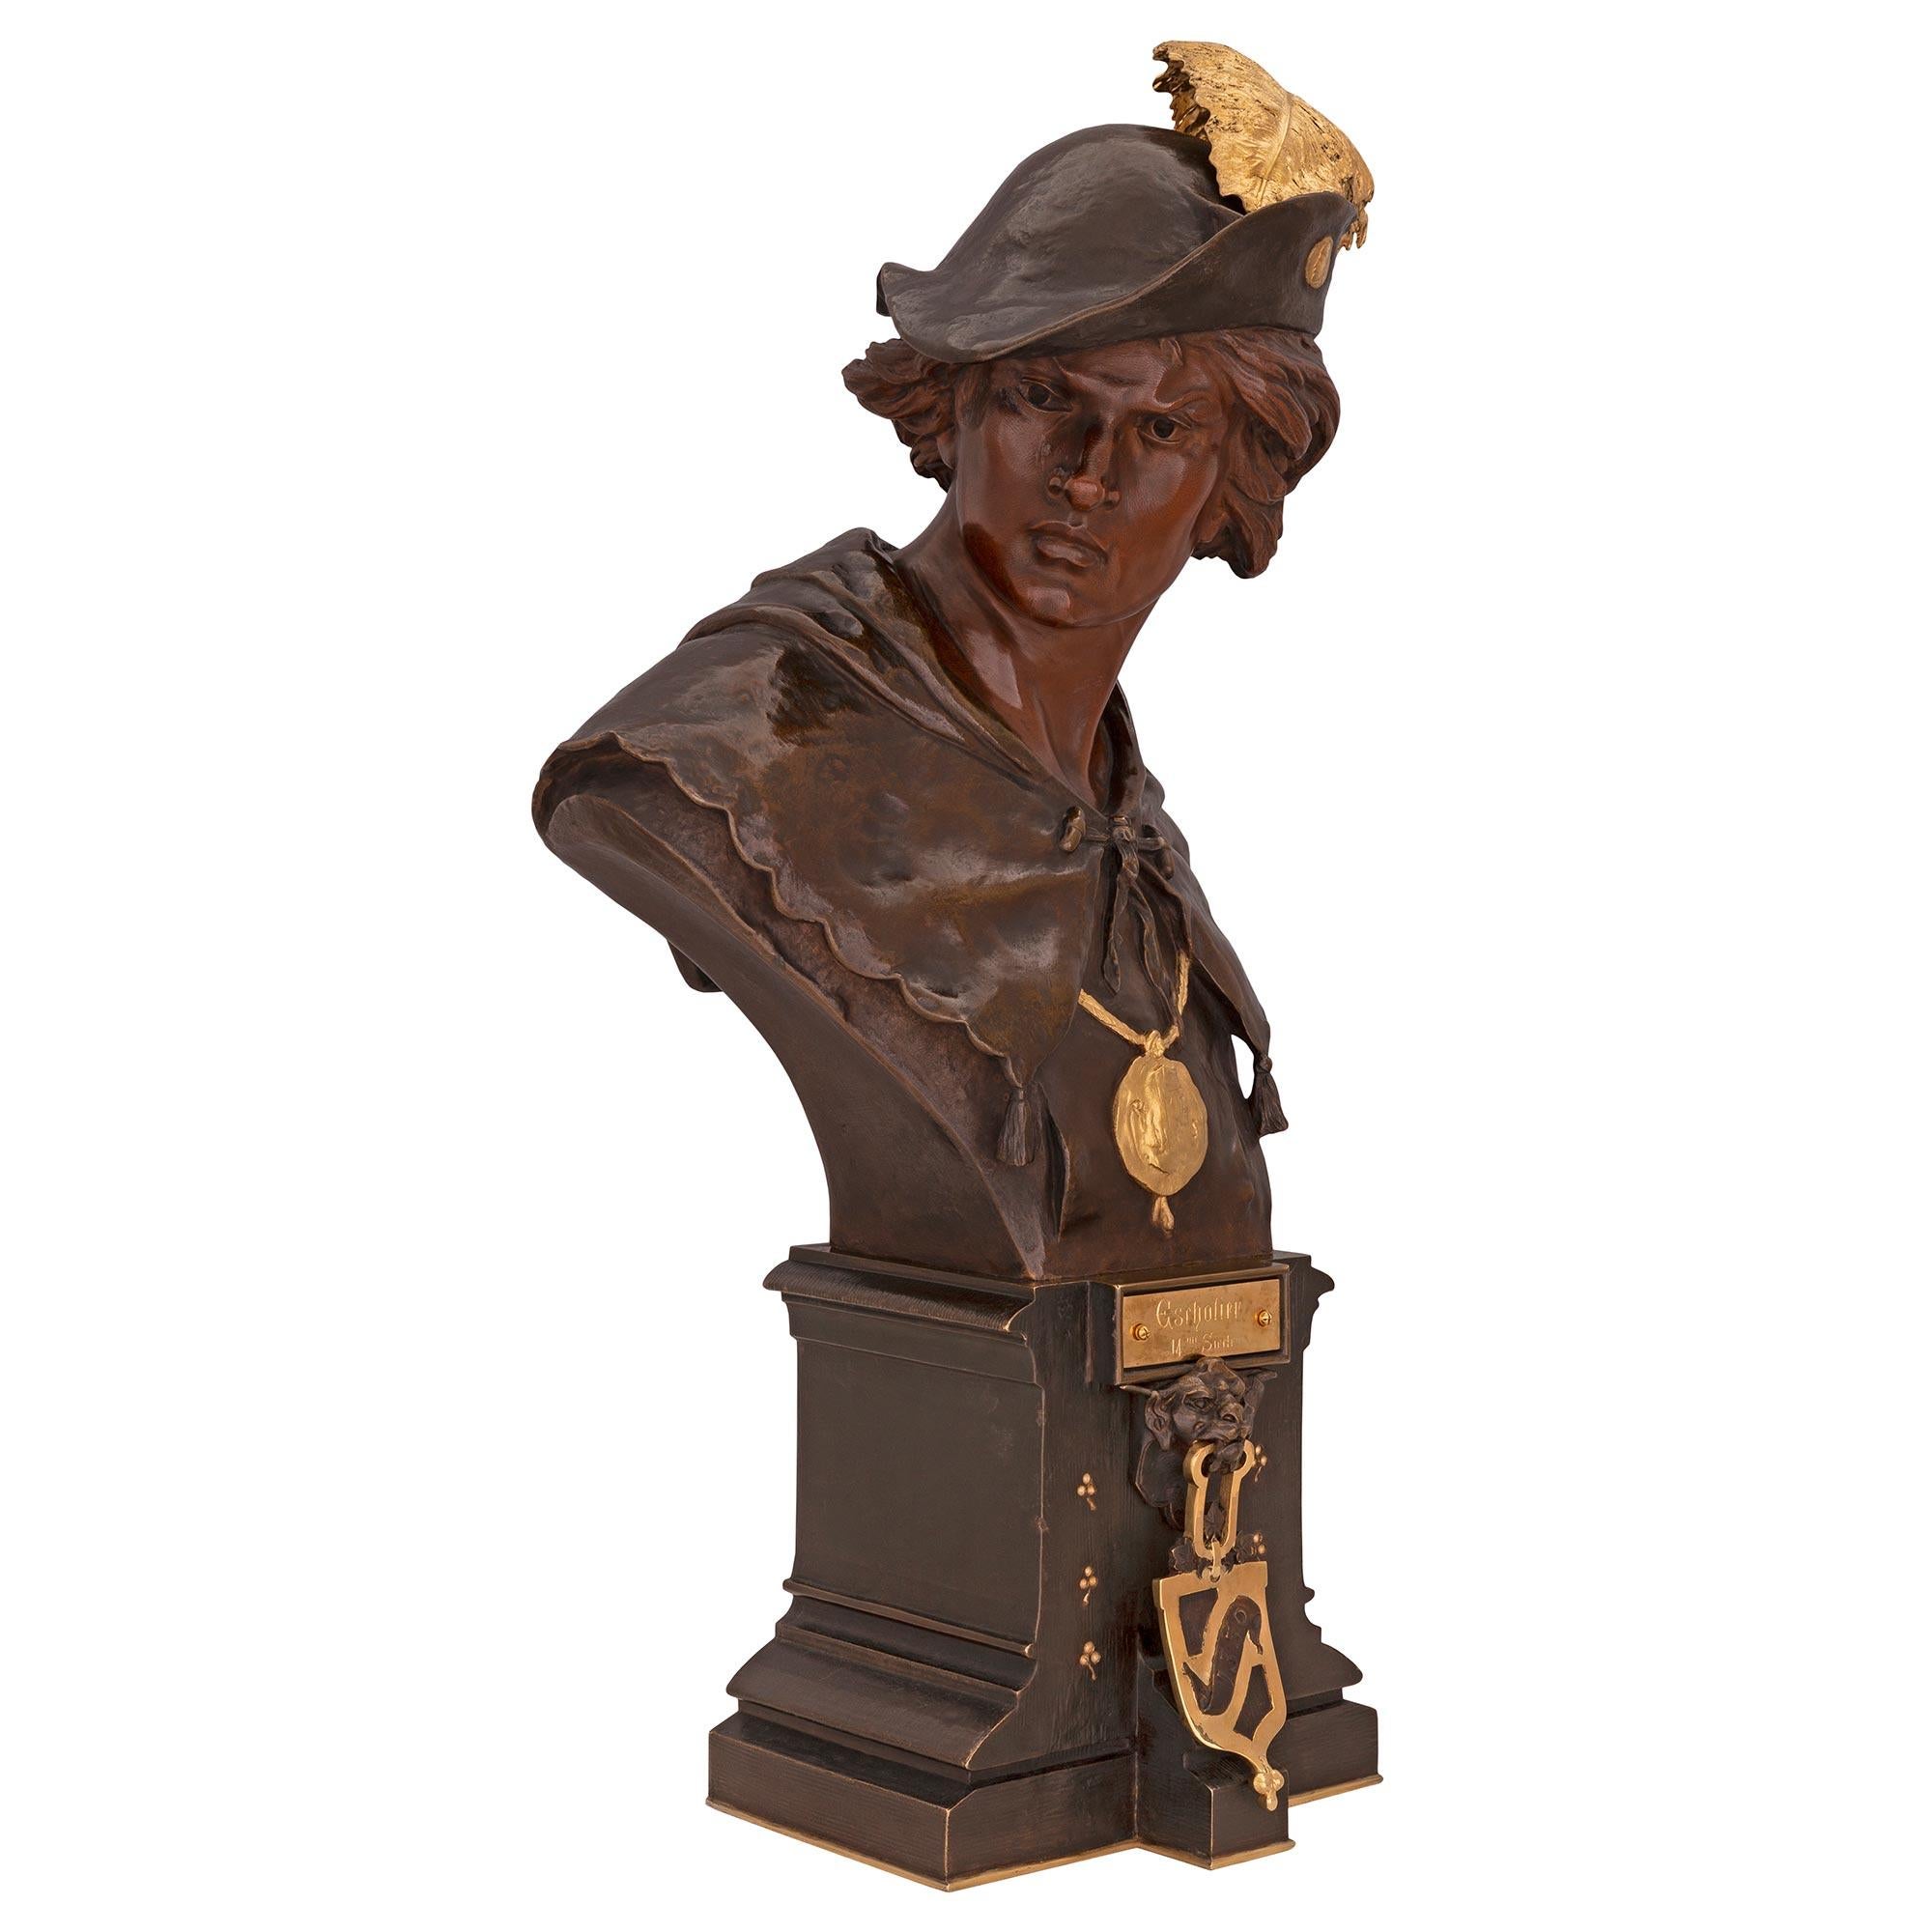 A handsome and extremely high quality French 19th century patinated bronze and ormolu bust, titled ESRHOLIER and signed by EMILE LOUIS PICAULT. The bust is raised by a square base with a fine bottom ormolu fillet and a lovely mottled design. At the